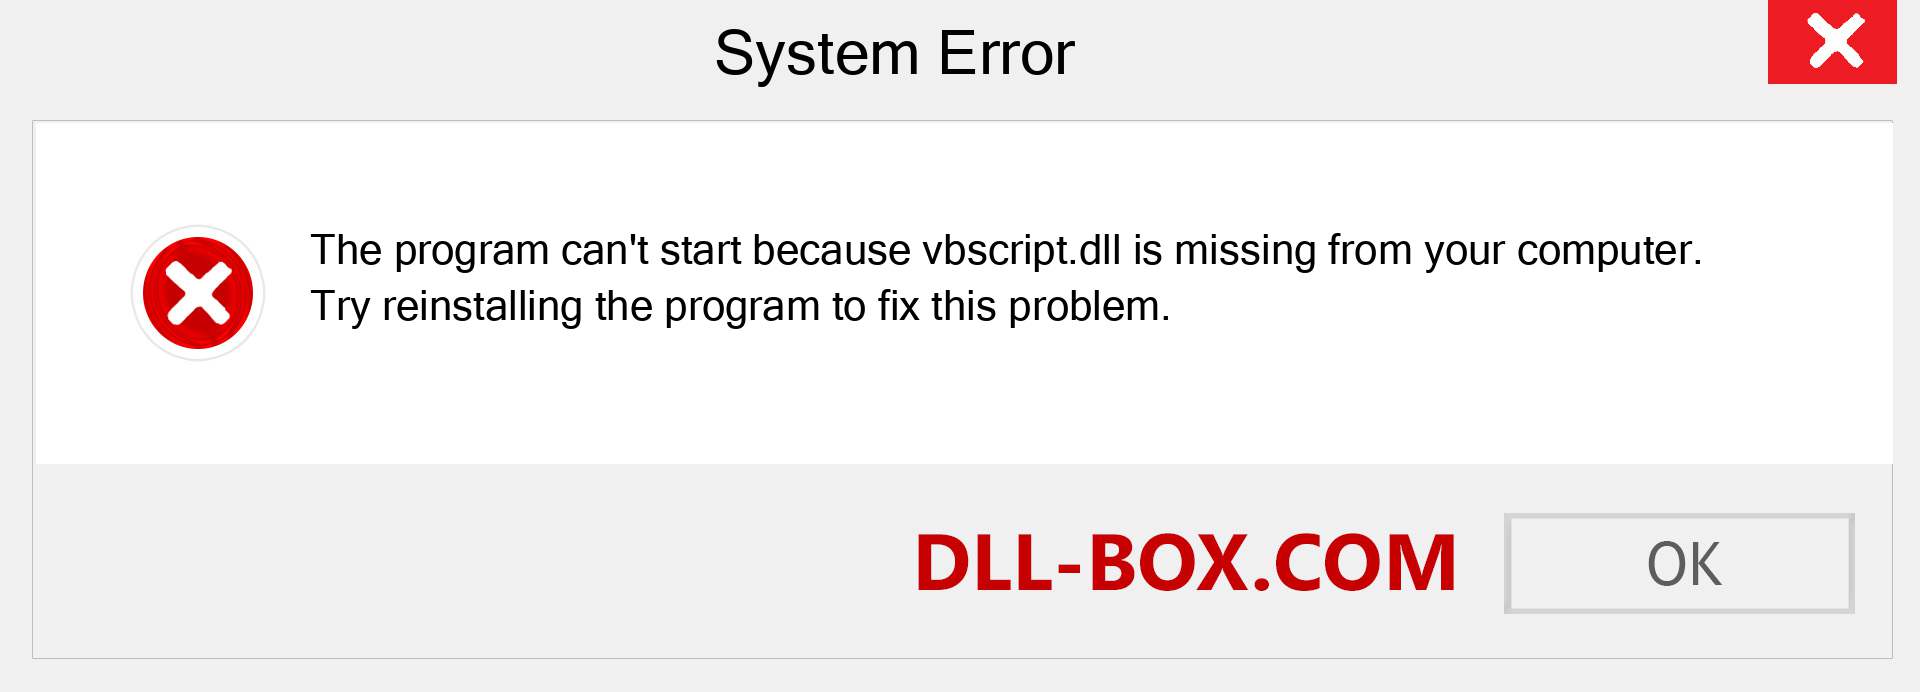  vbscript.dll file is missing?. Download for Windows 7, 8, 10 - Fix  vbscript dll Missing Error on Windows, photos, images